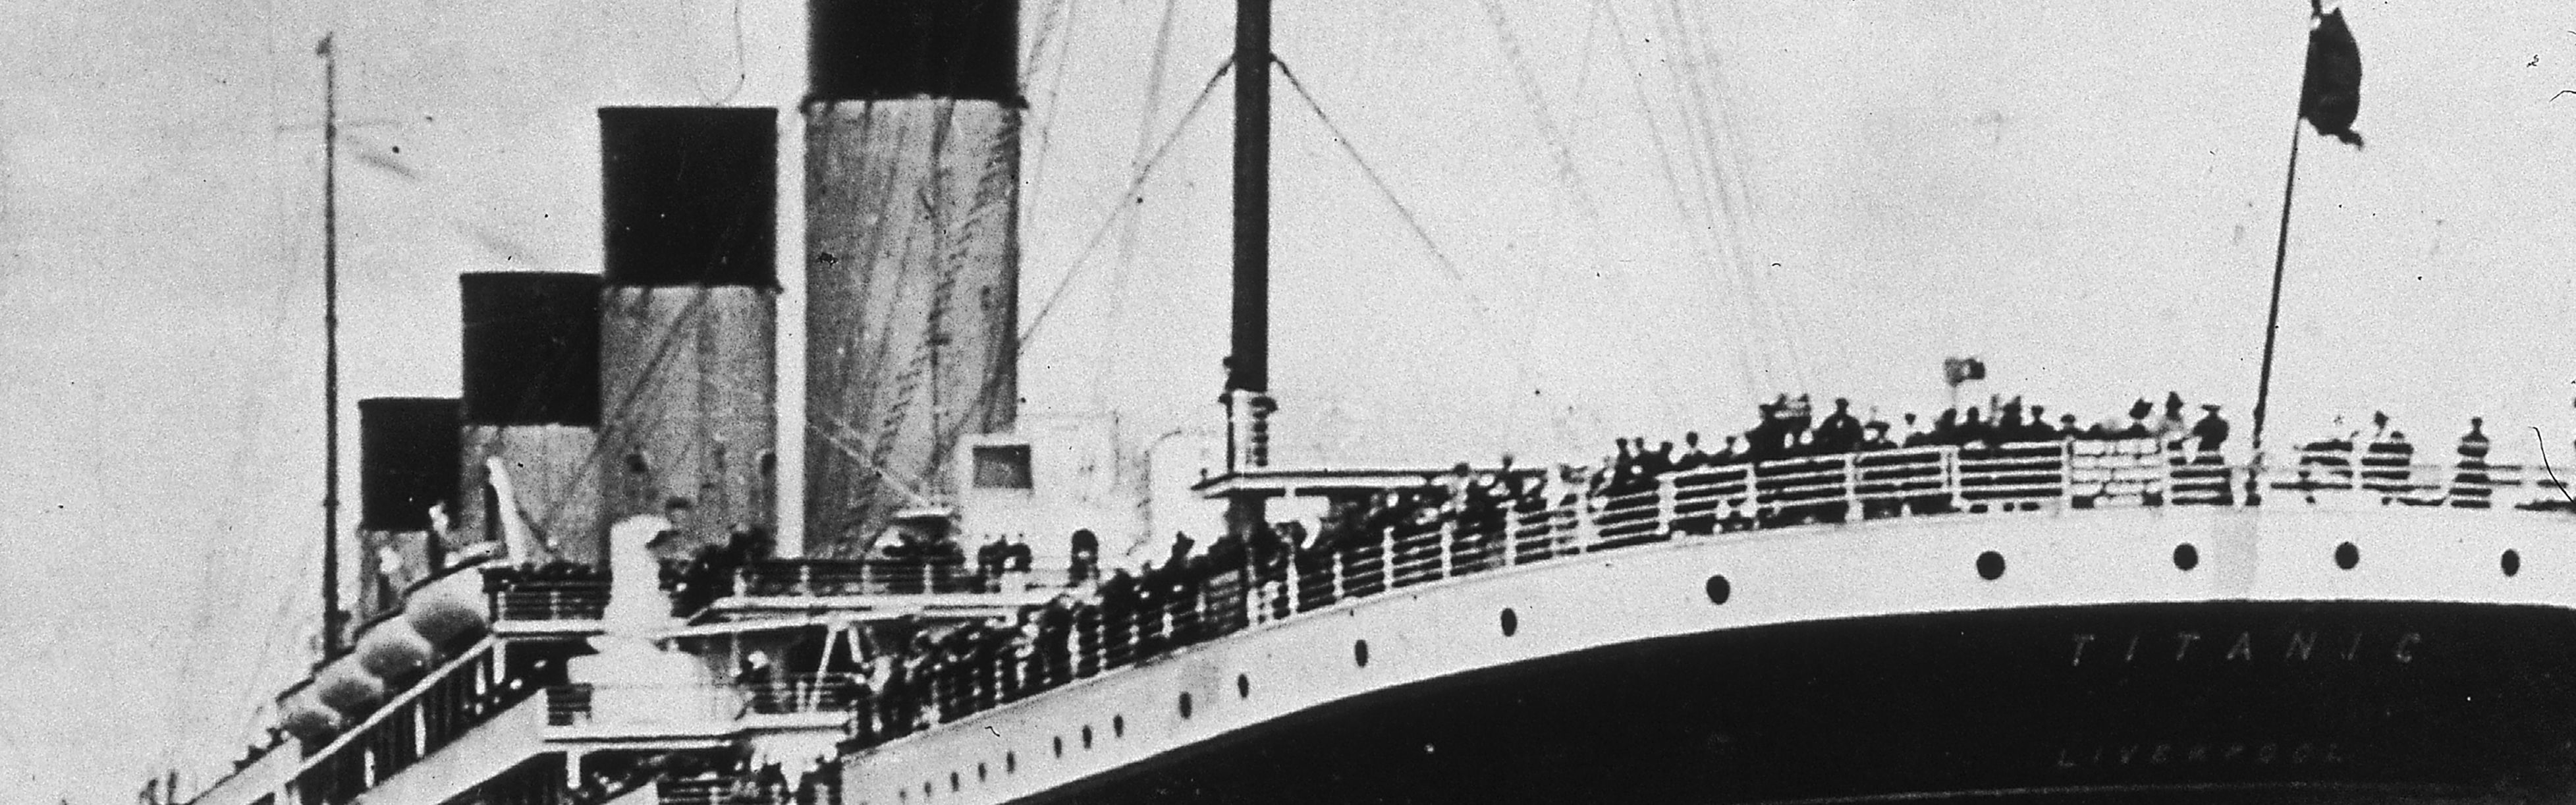 Why the Titanic fascinates more than other disasters | CNN